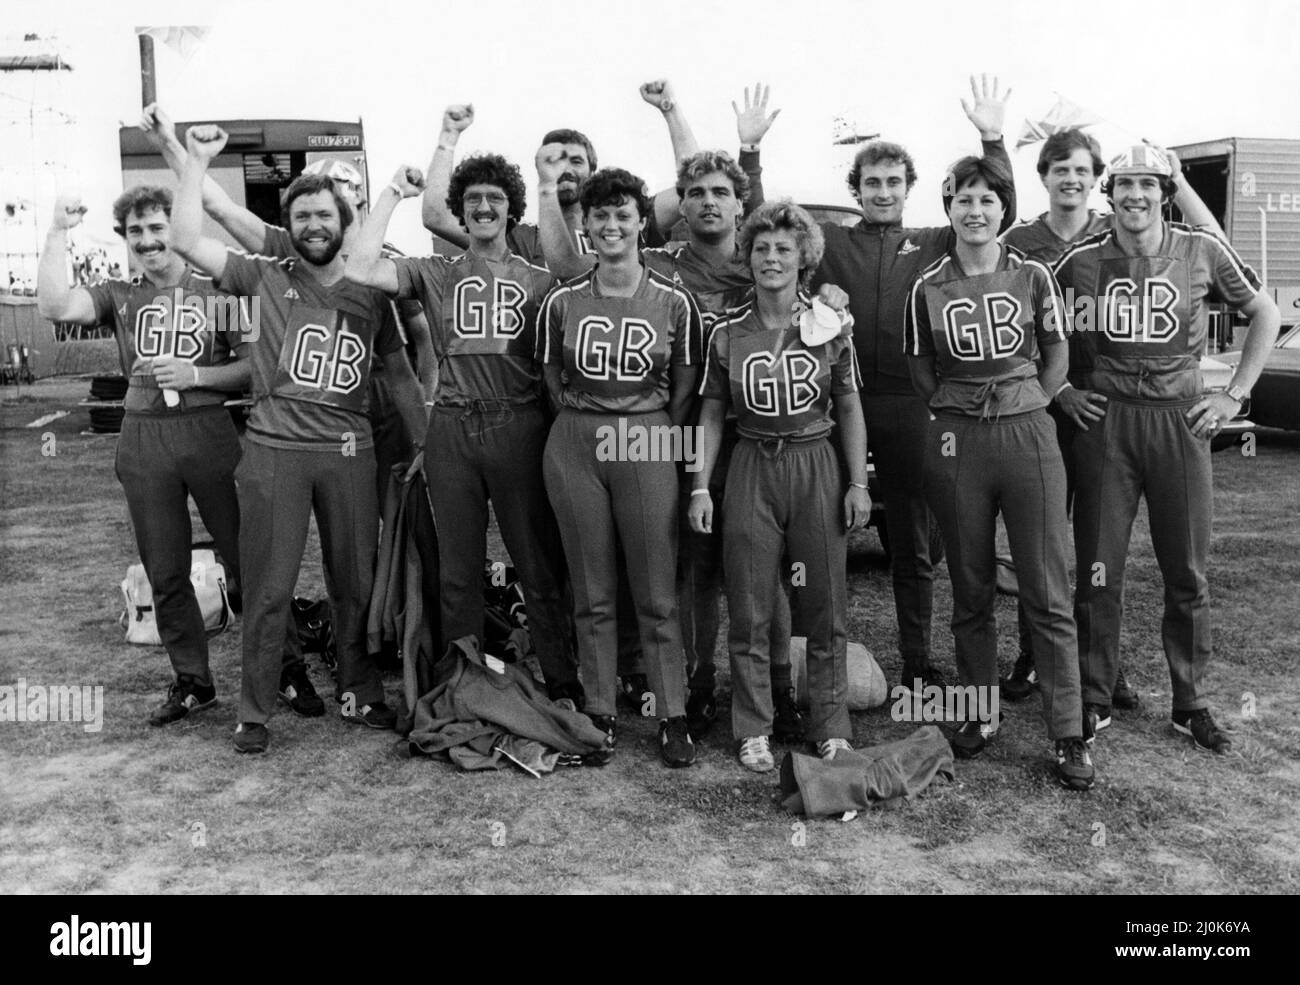 Television Programme BBC series It's a Knockout   The British heat of Jeux Sans Frontieres which is being held at Princess Anne Park in Washington, Tyne and Wear 25 August 1981 - The Sunderland team before going into action Stock Photo